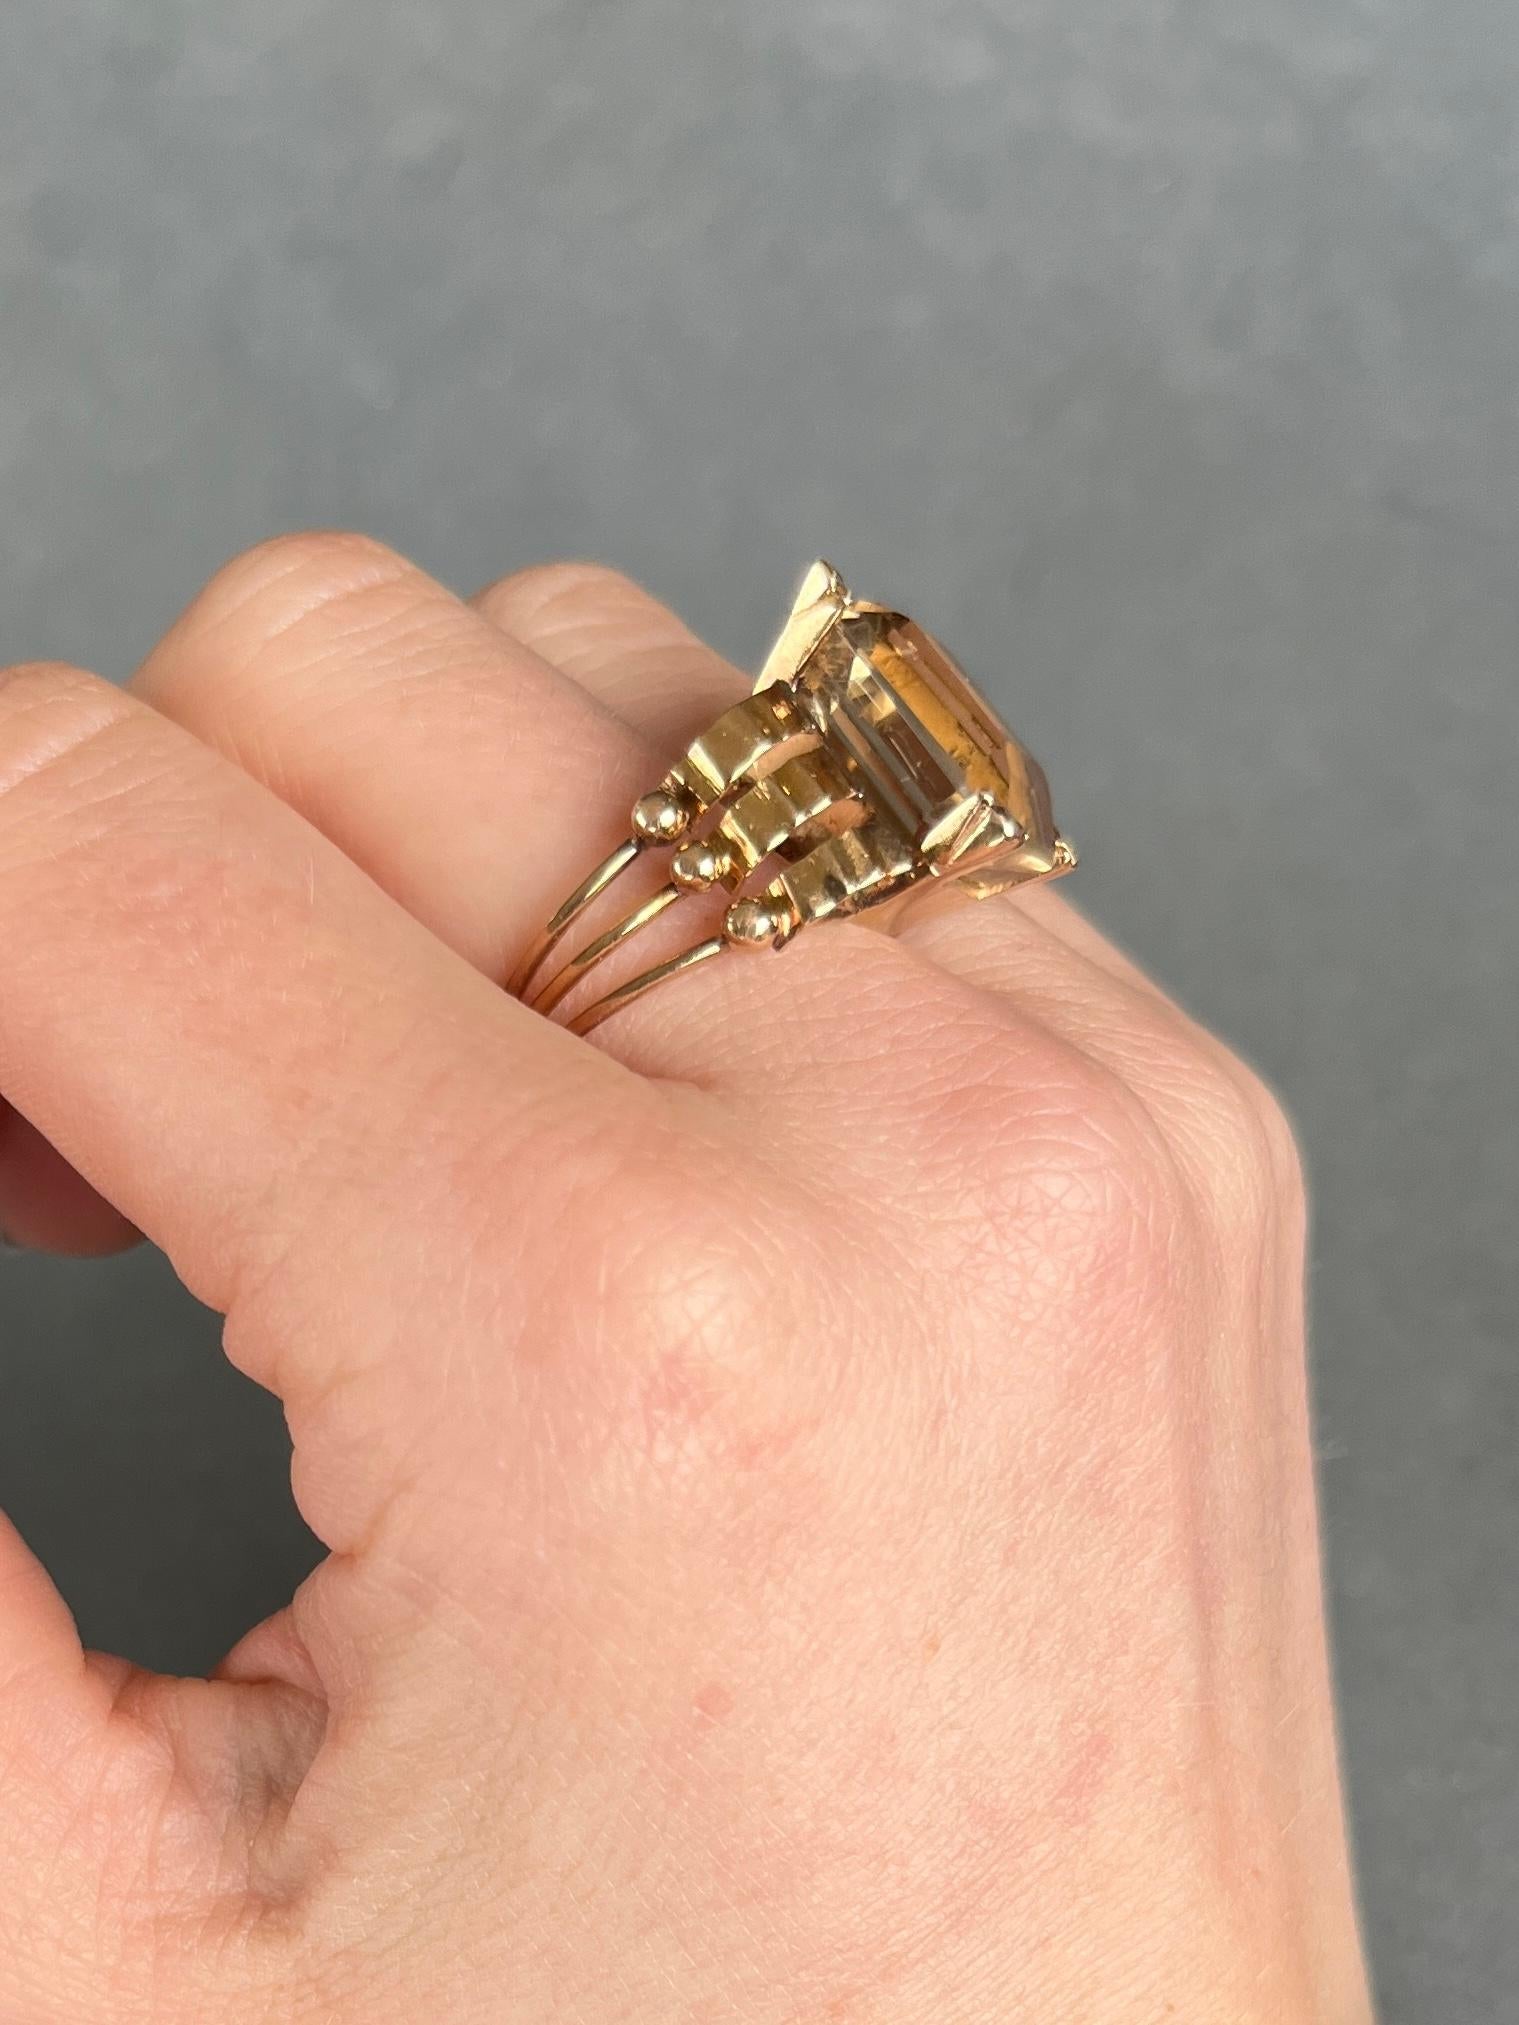 The gorgeous large citrine stone is a pale yellow colour set in decorative claws. The gallery is solid and the shoulders and band are made up of three bands of gold. All modelled in 9carat gold.

Ring Size: O or 7 1/4 
Stone Dimensions: